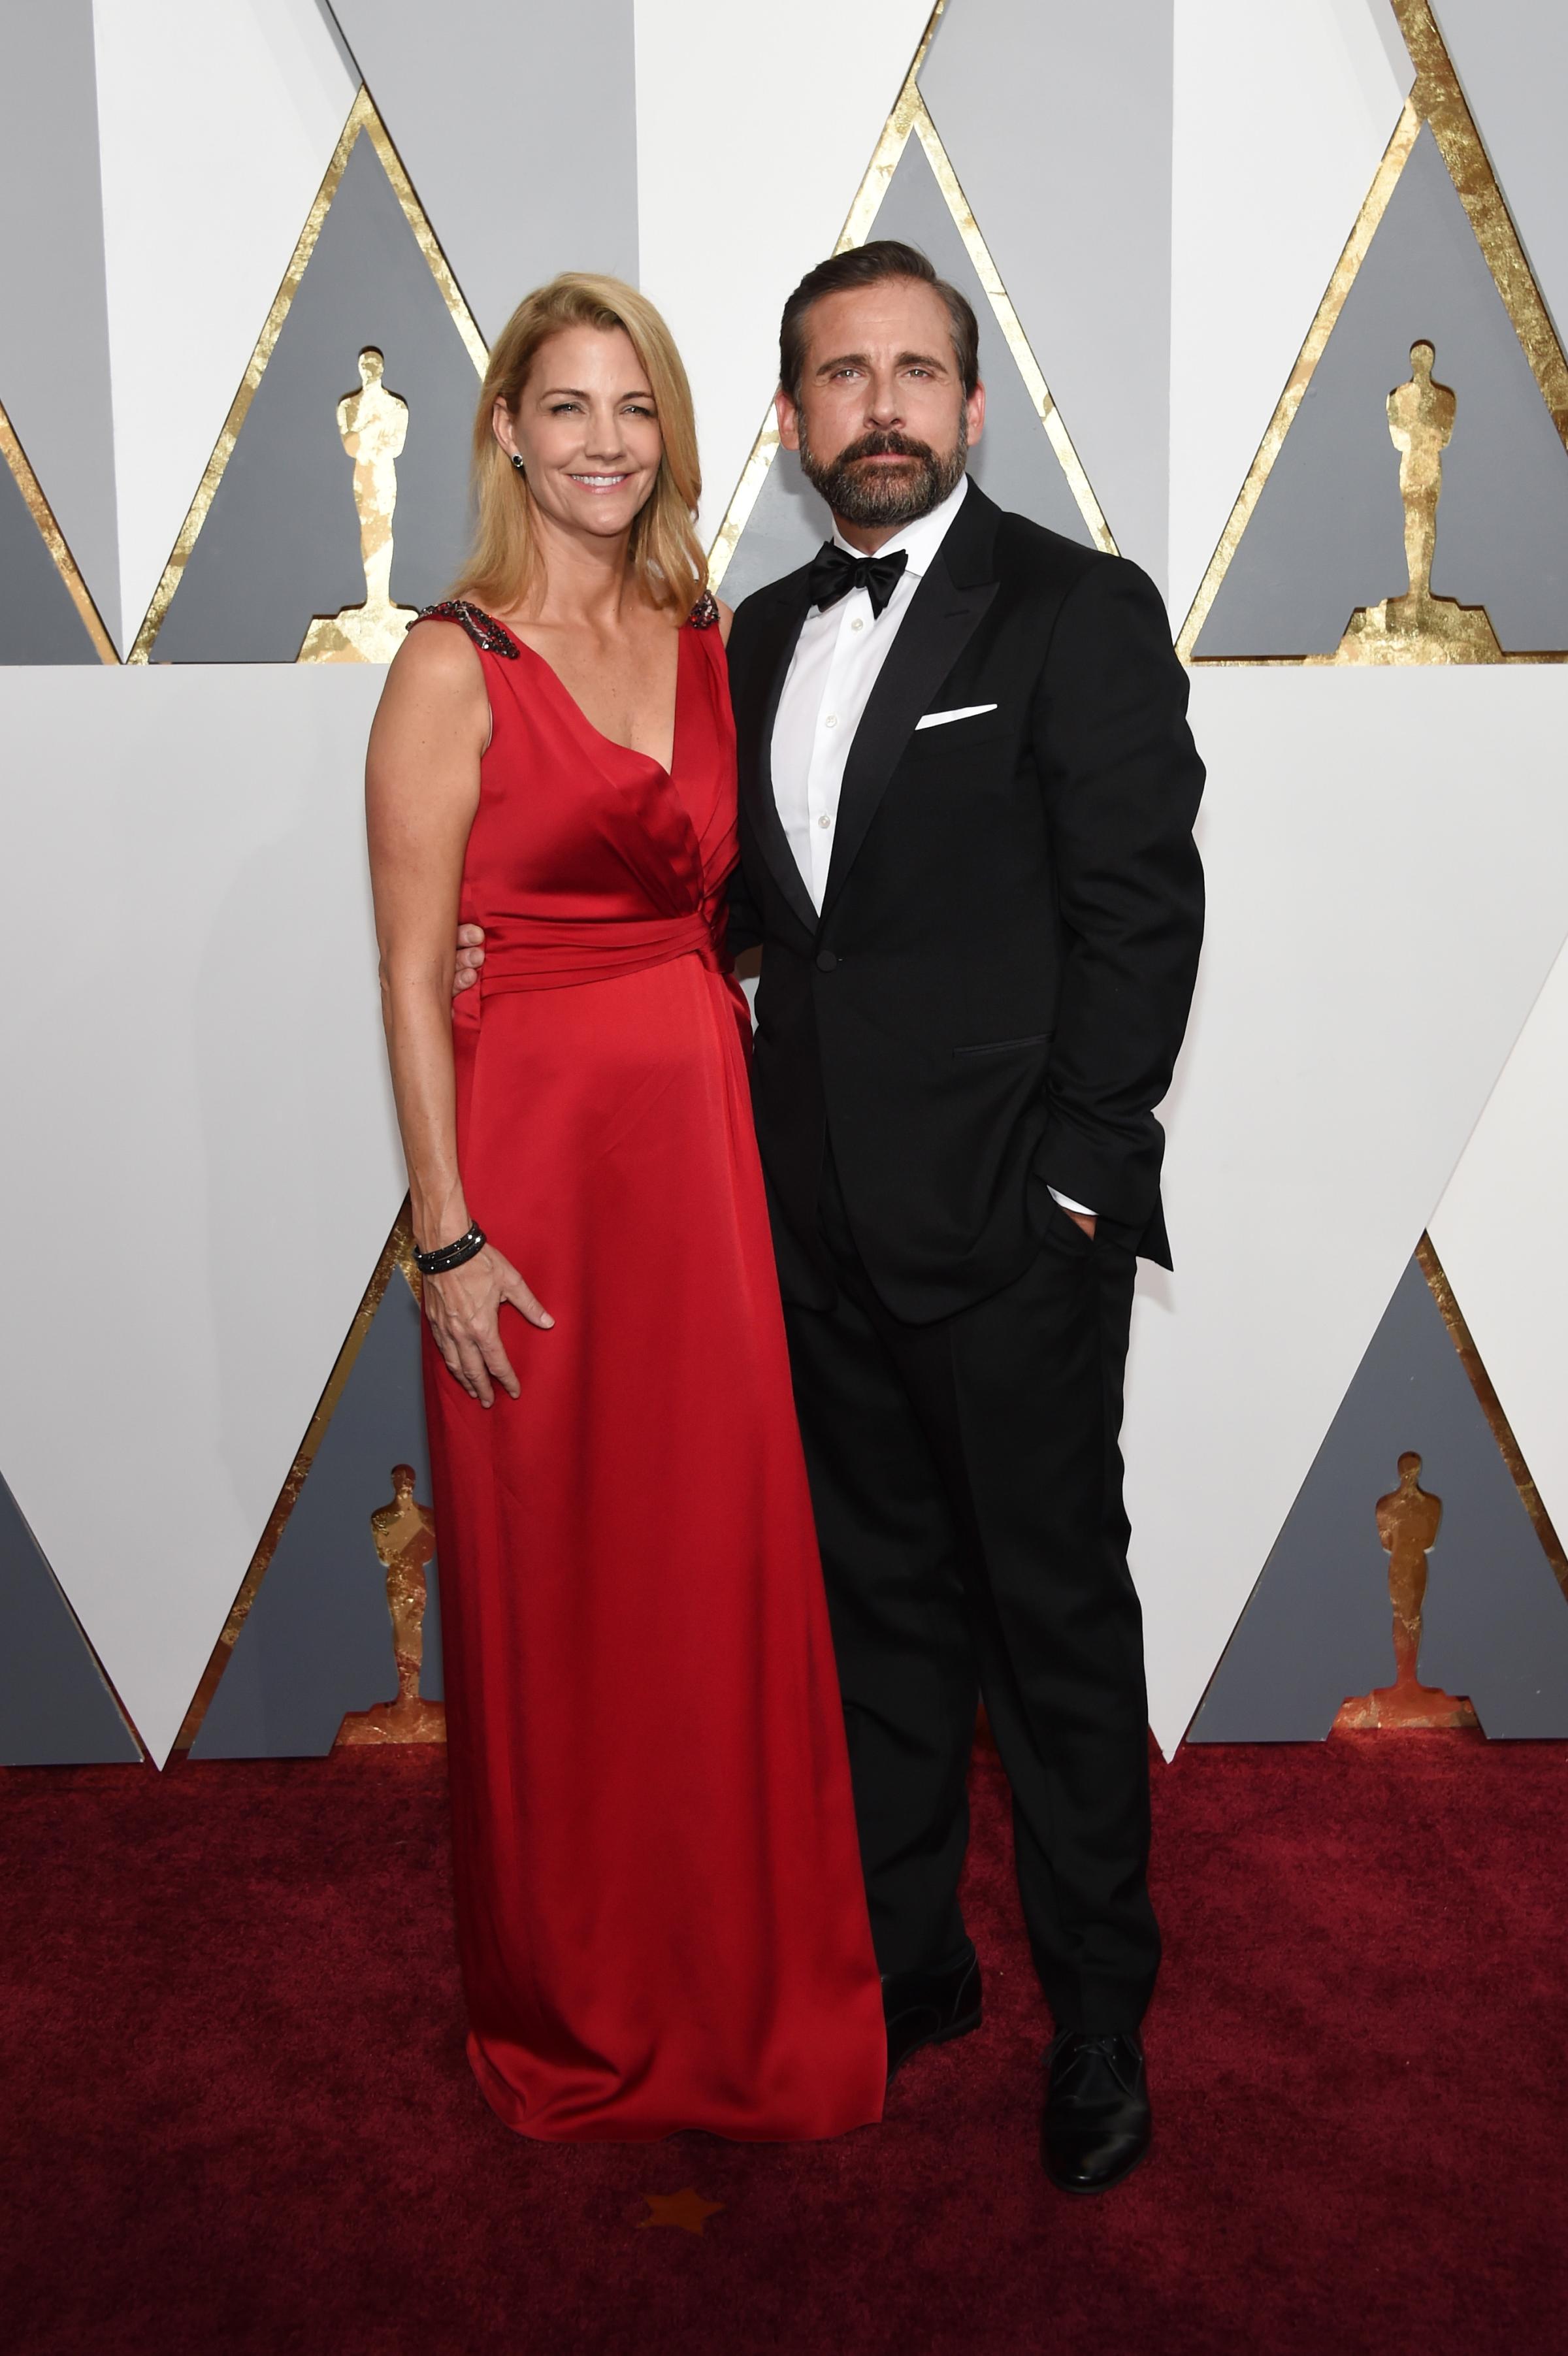 Nancy Carell and Steve Carell attend the 88th Annual Academy Awards on Feb. 28, 2016 in Hollywood, Calif.